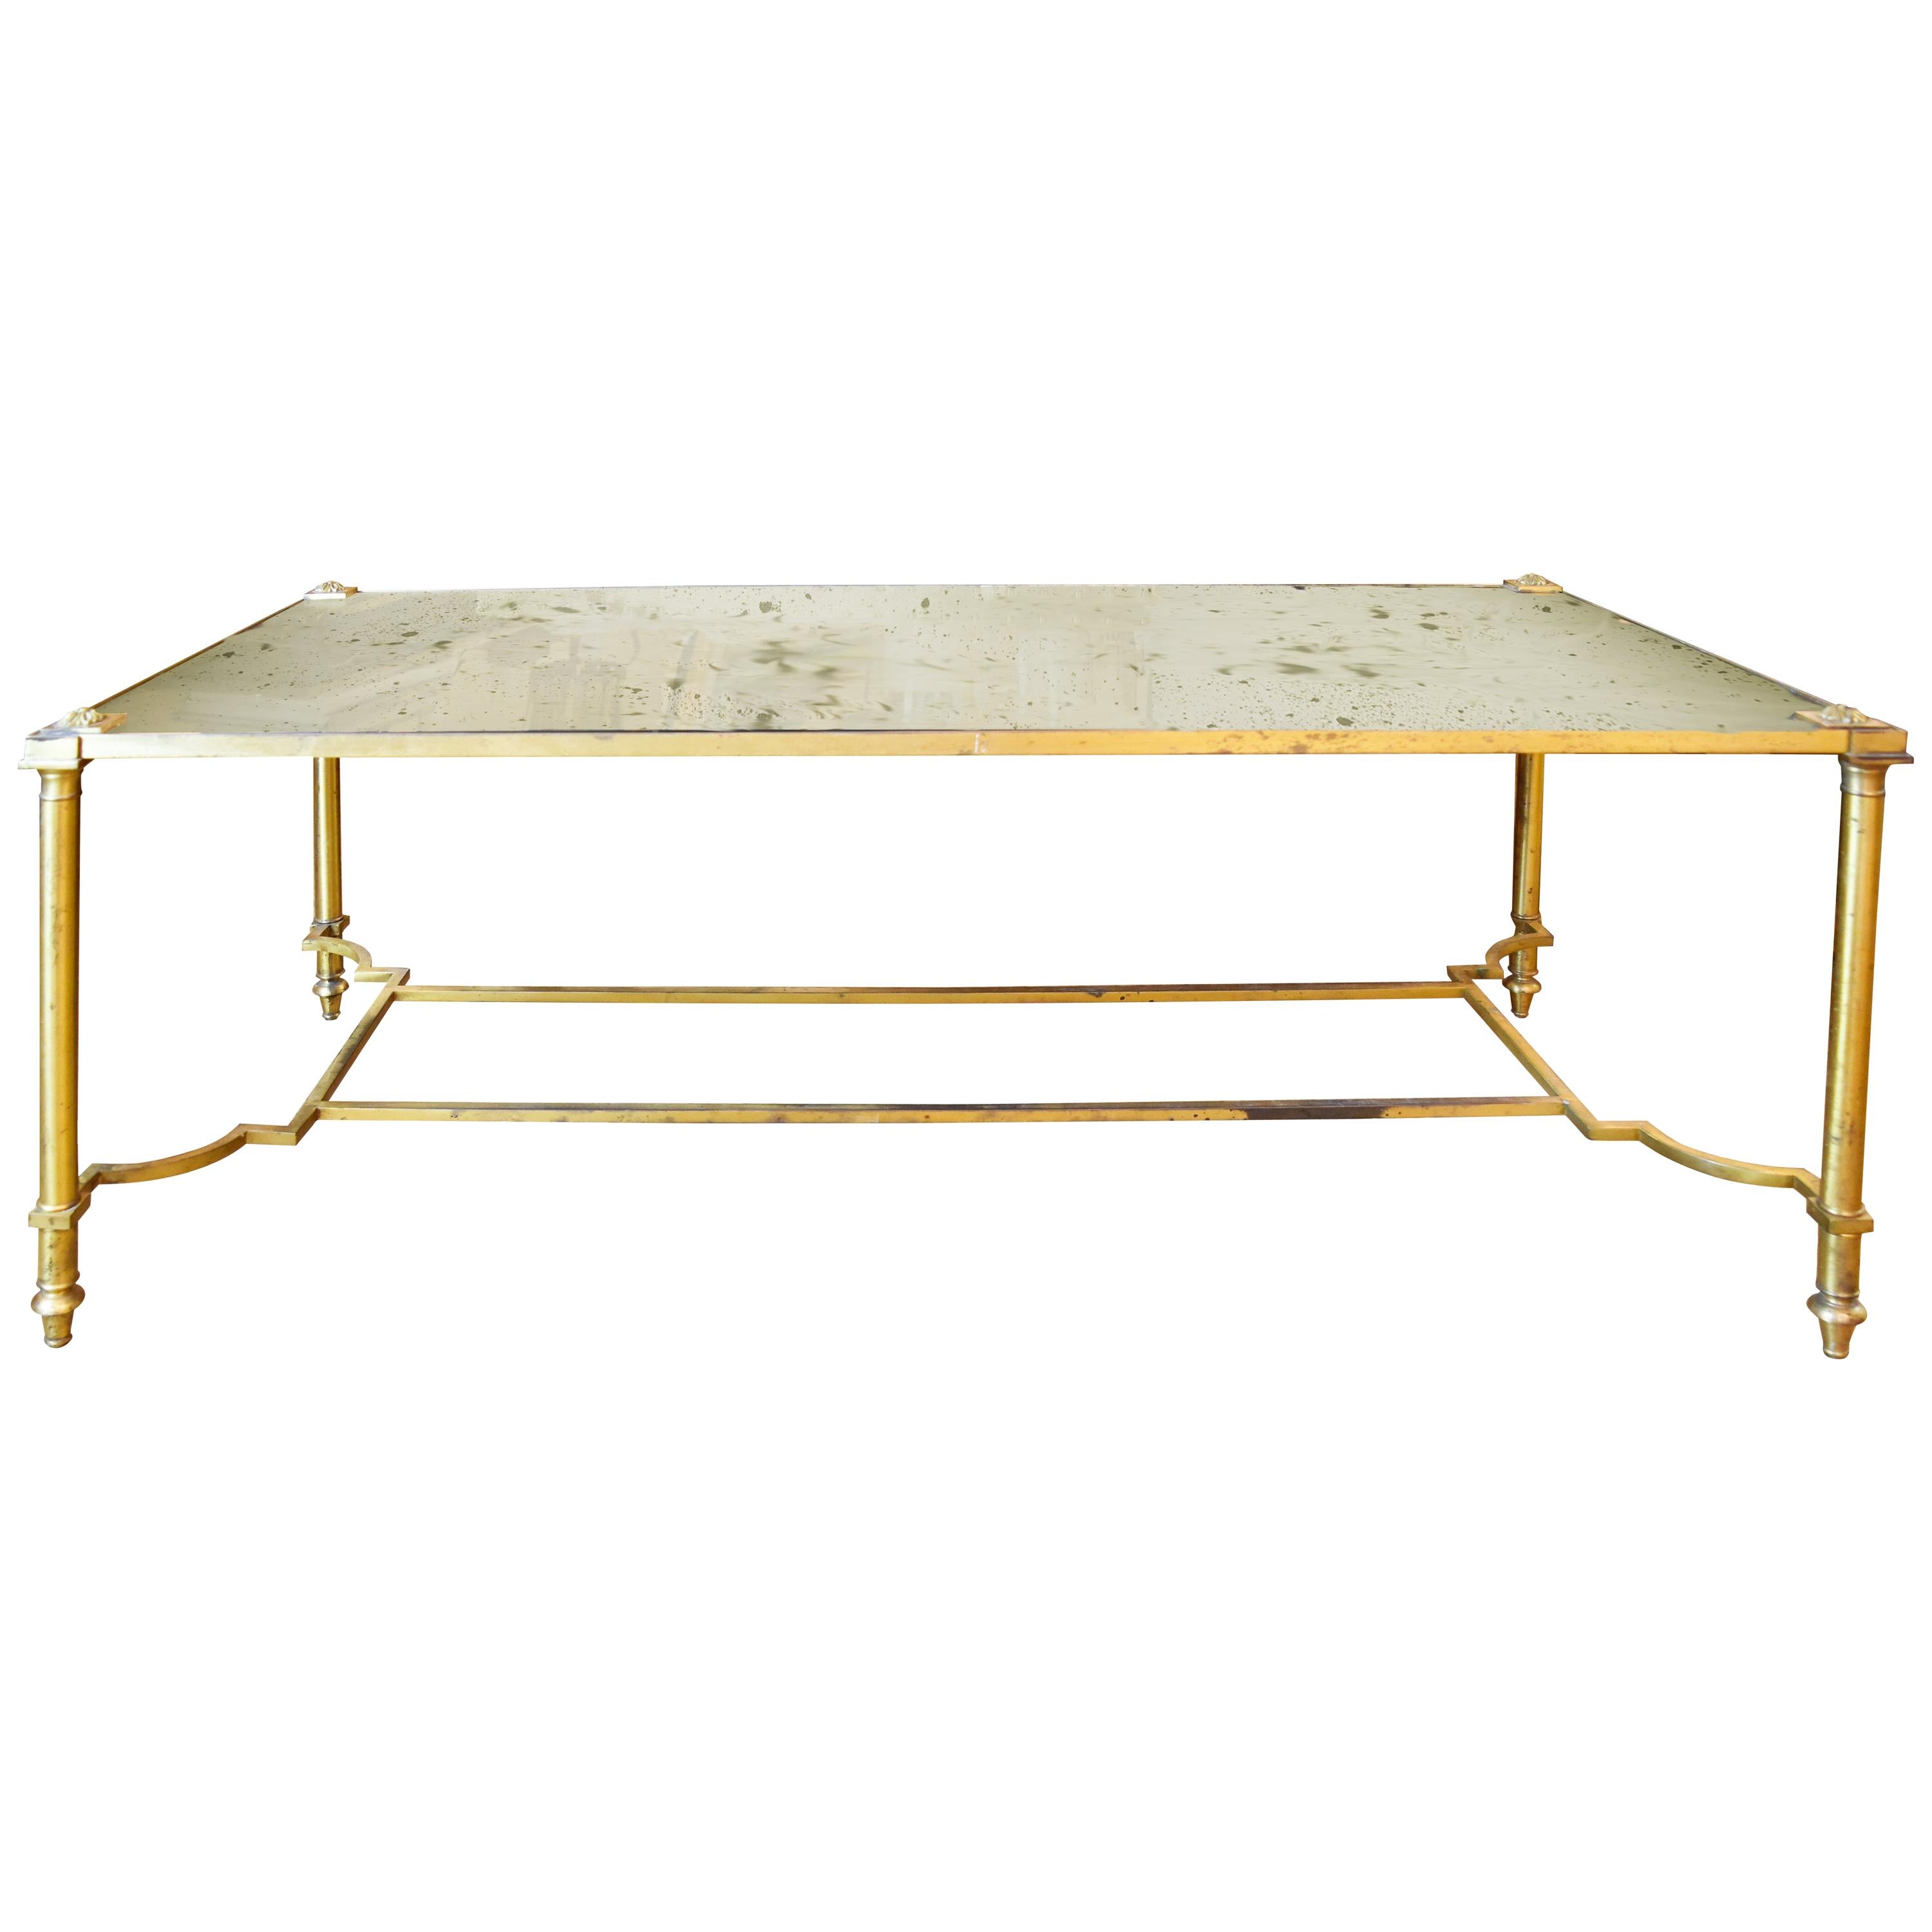 Vintage French Coffee Table with Antiqued Mirrored Top